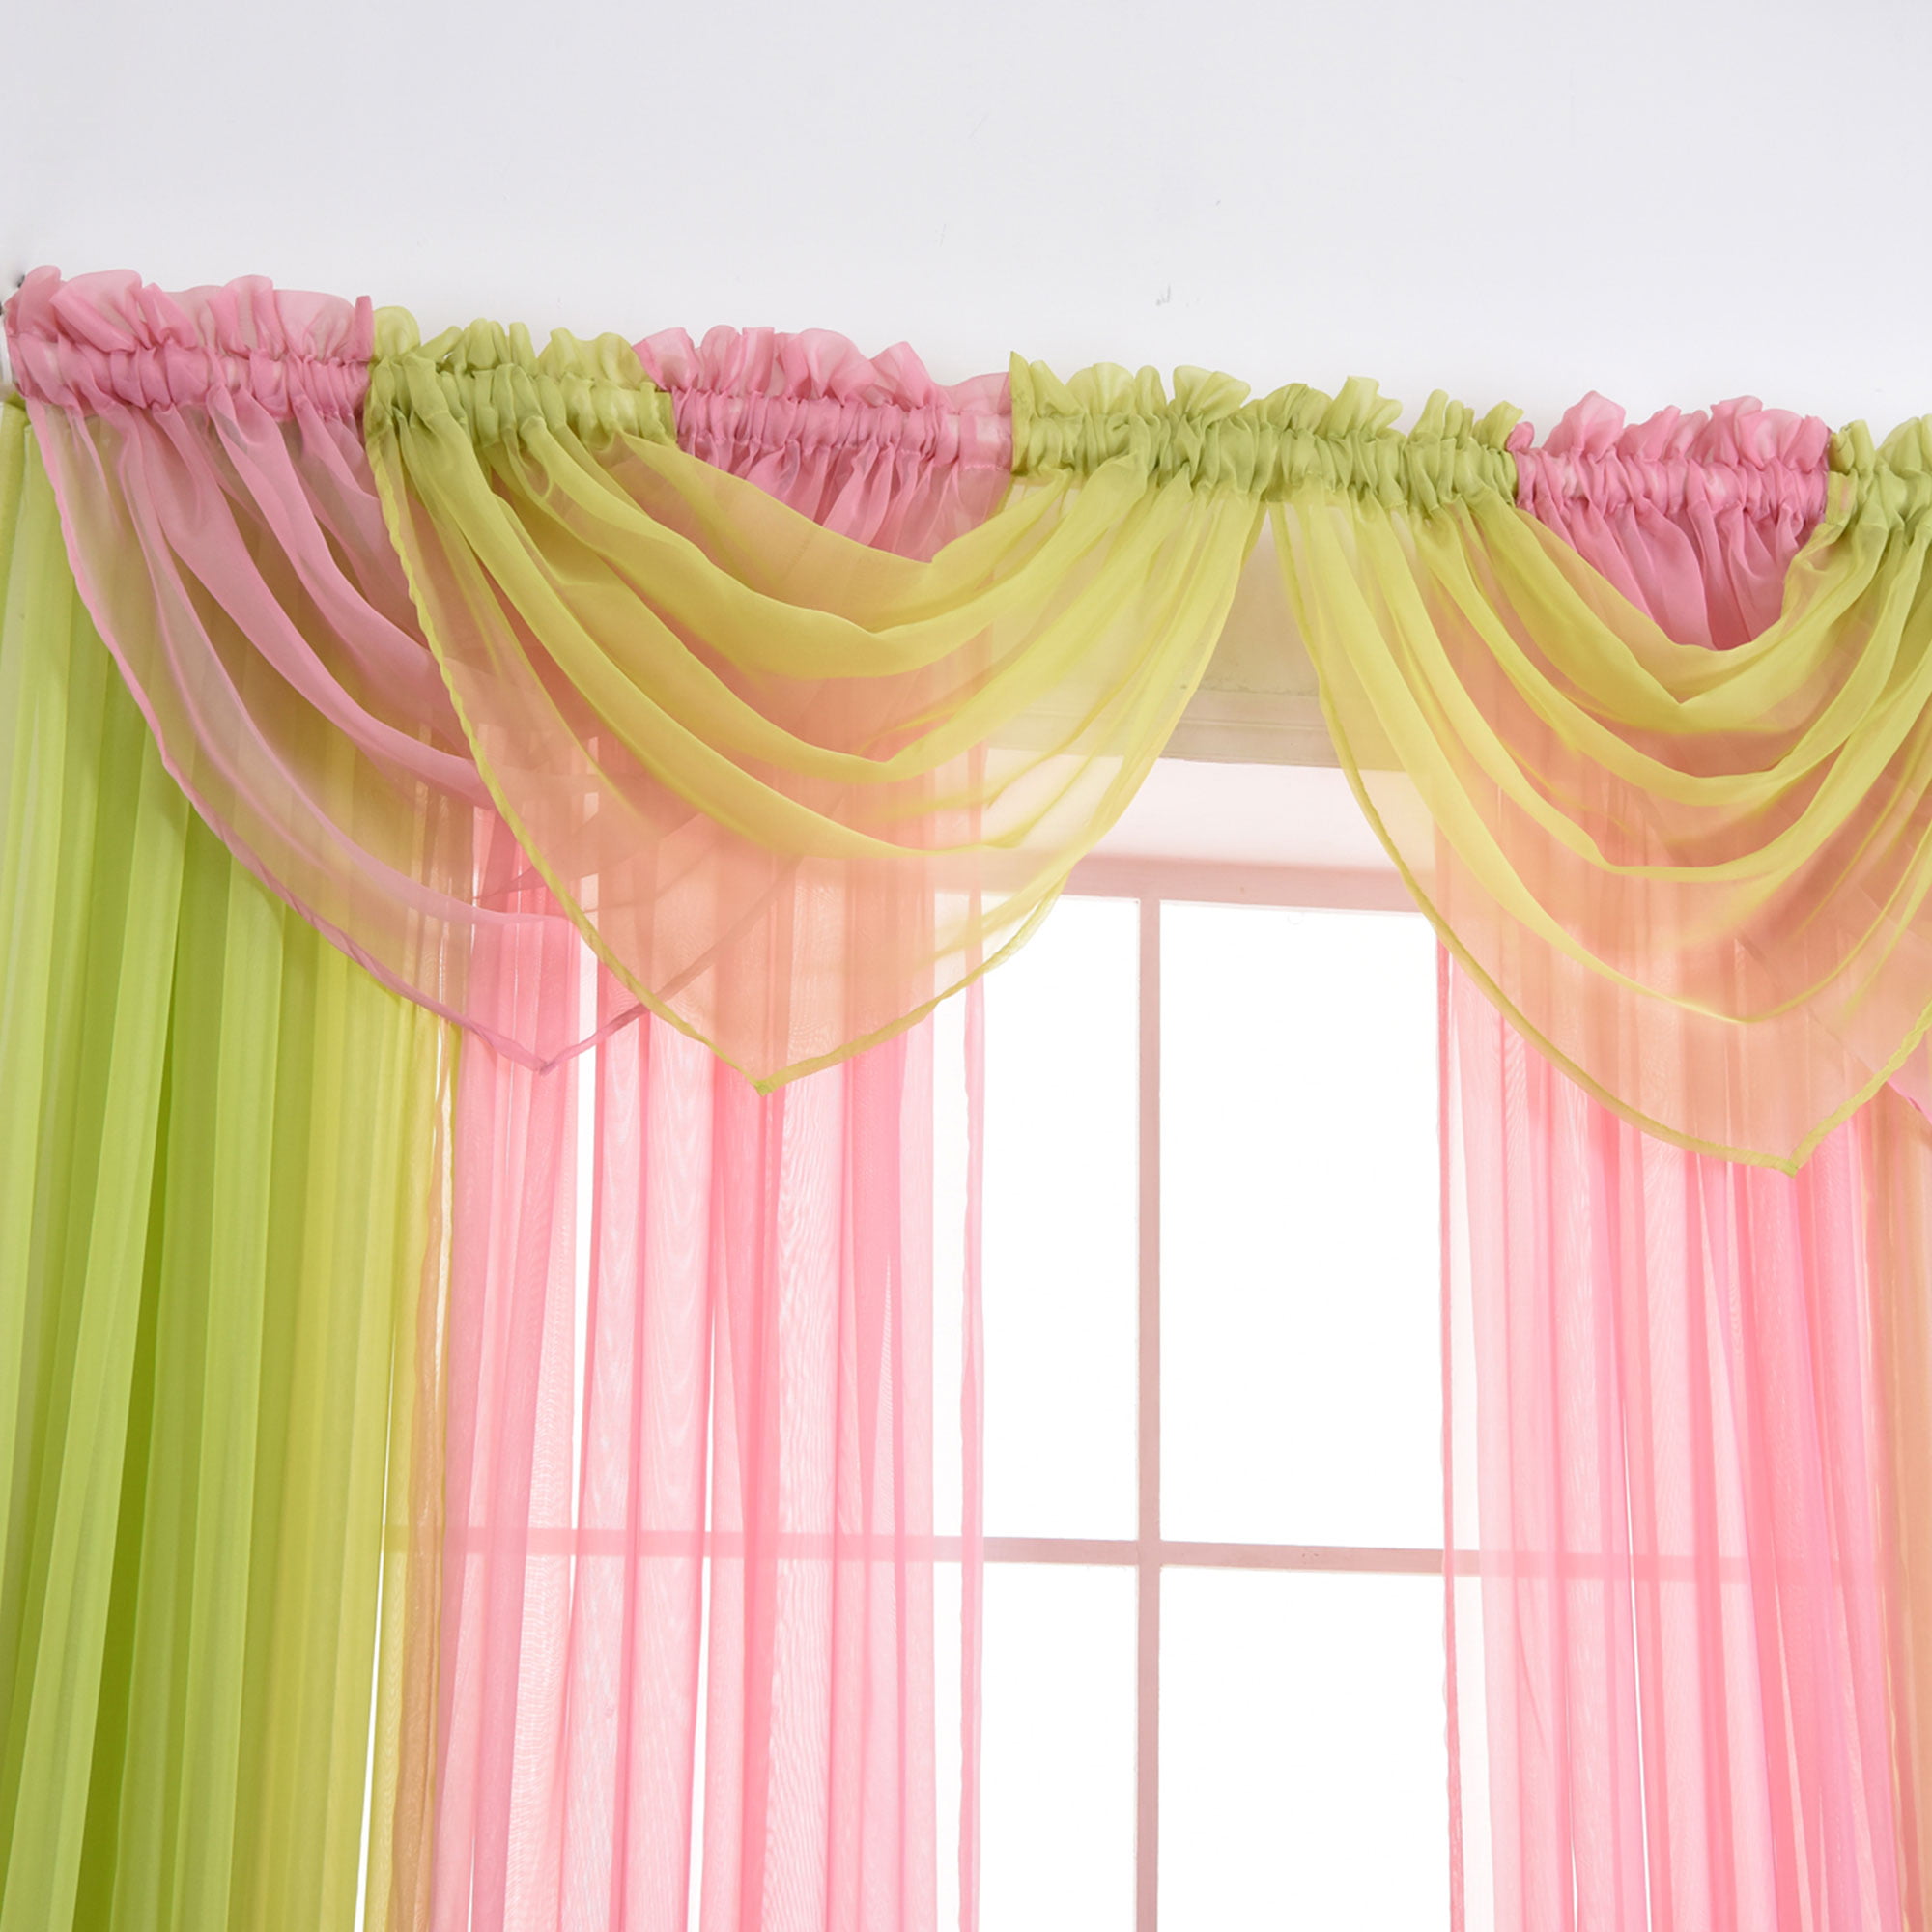 Sheer Voile Window Curtains/Drape/Panel/Treatment Or Scarf Assorted Solid Color 